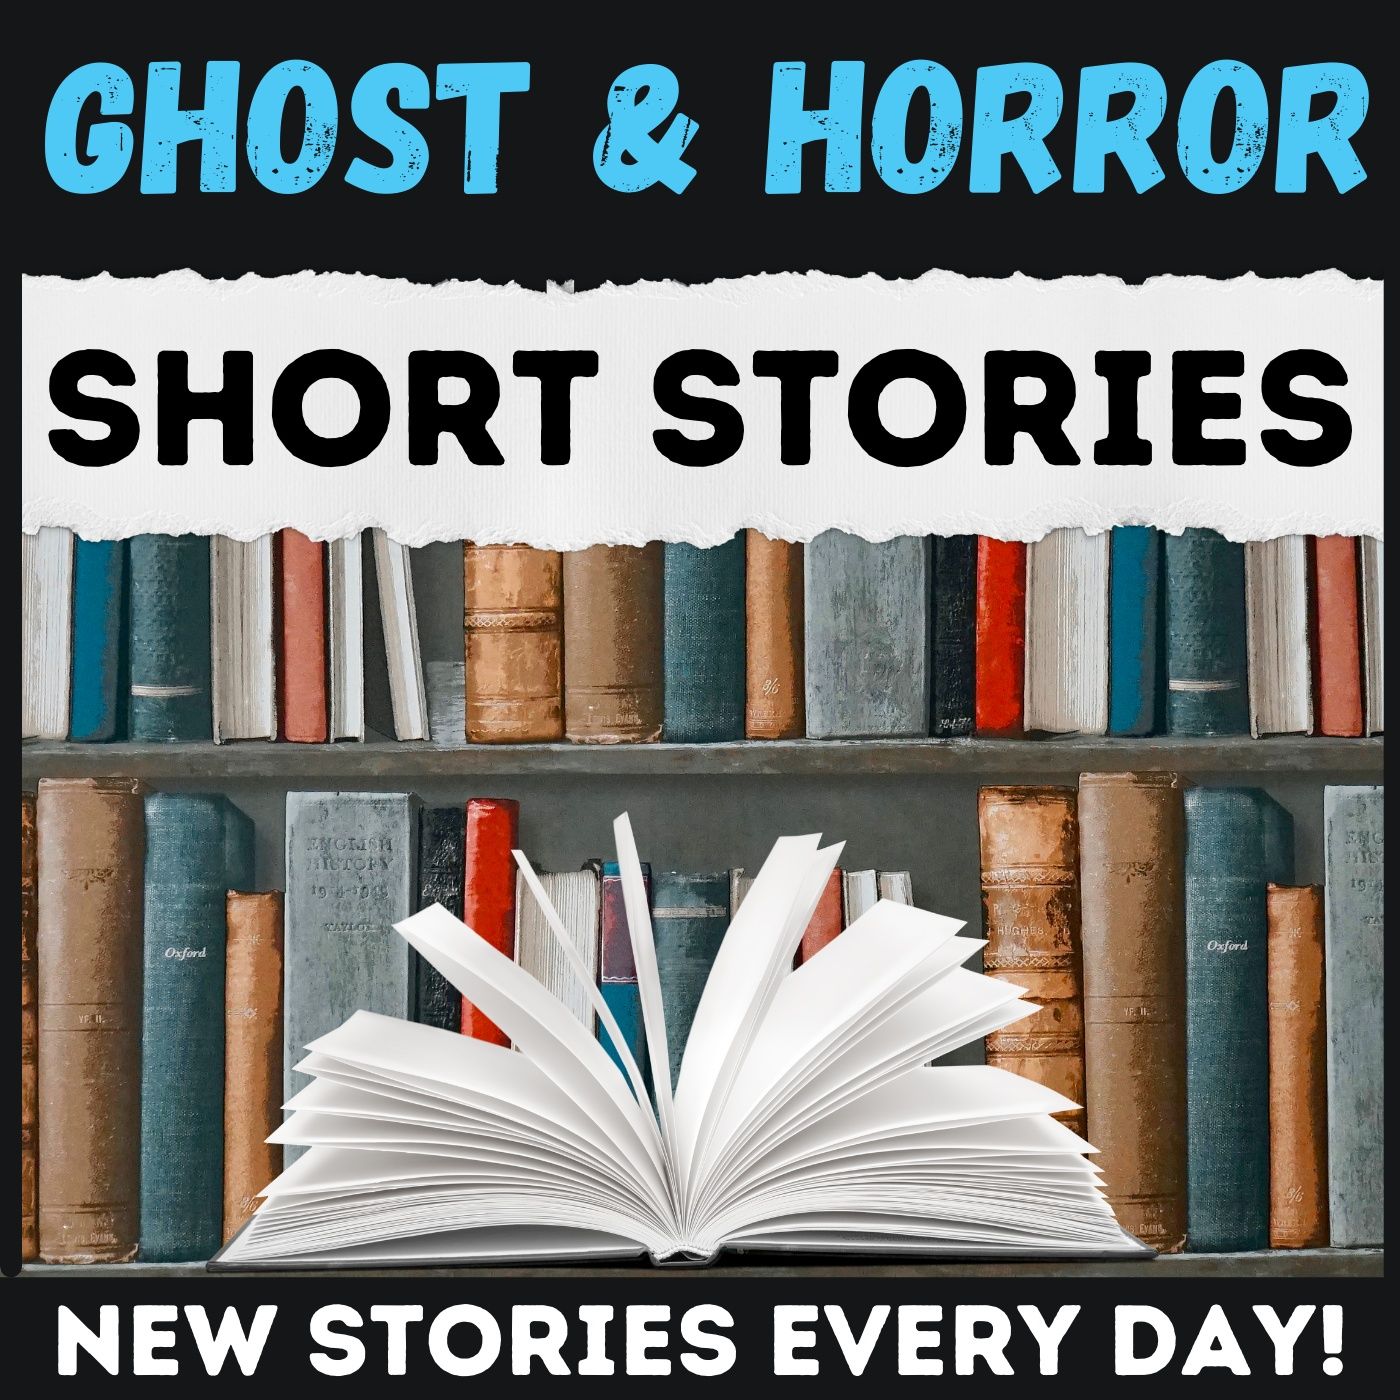 Daily Short Stories – Ghost and Horror